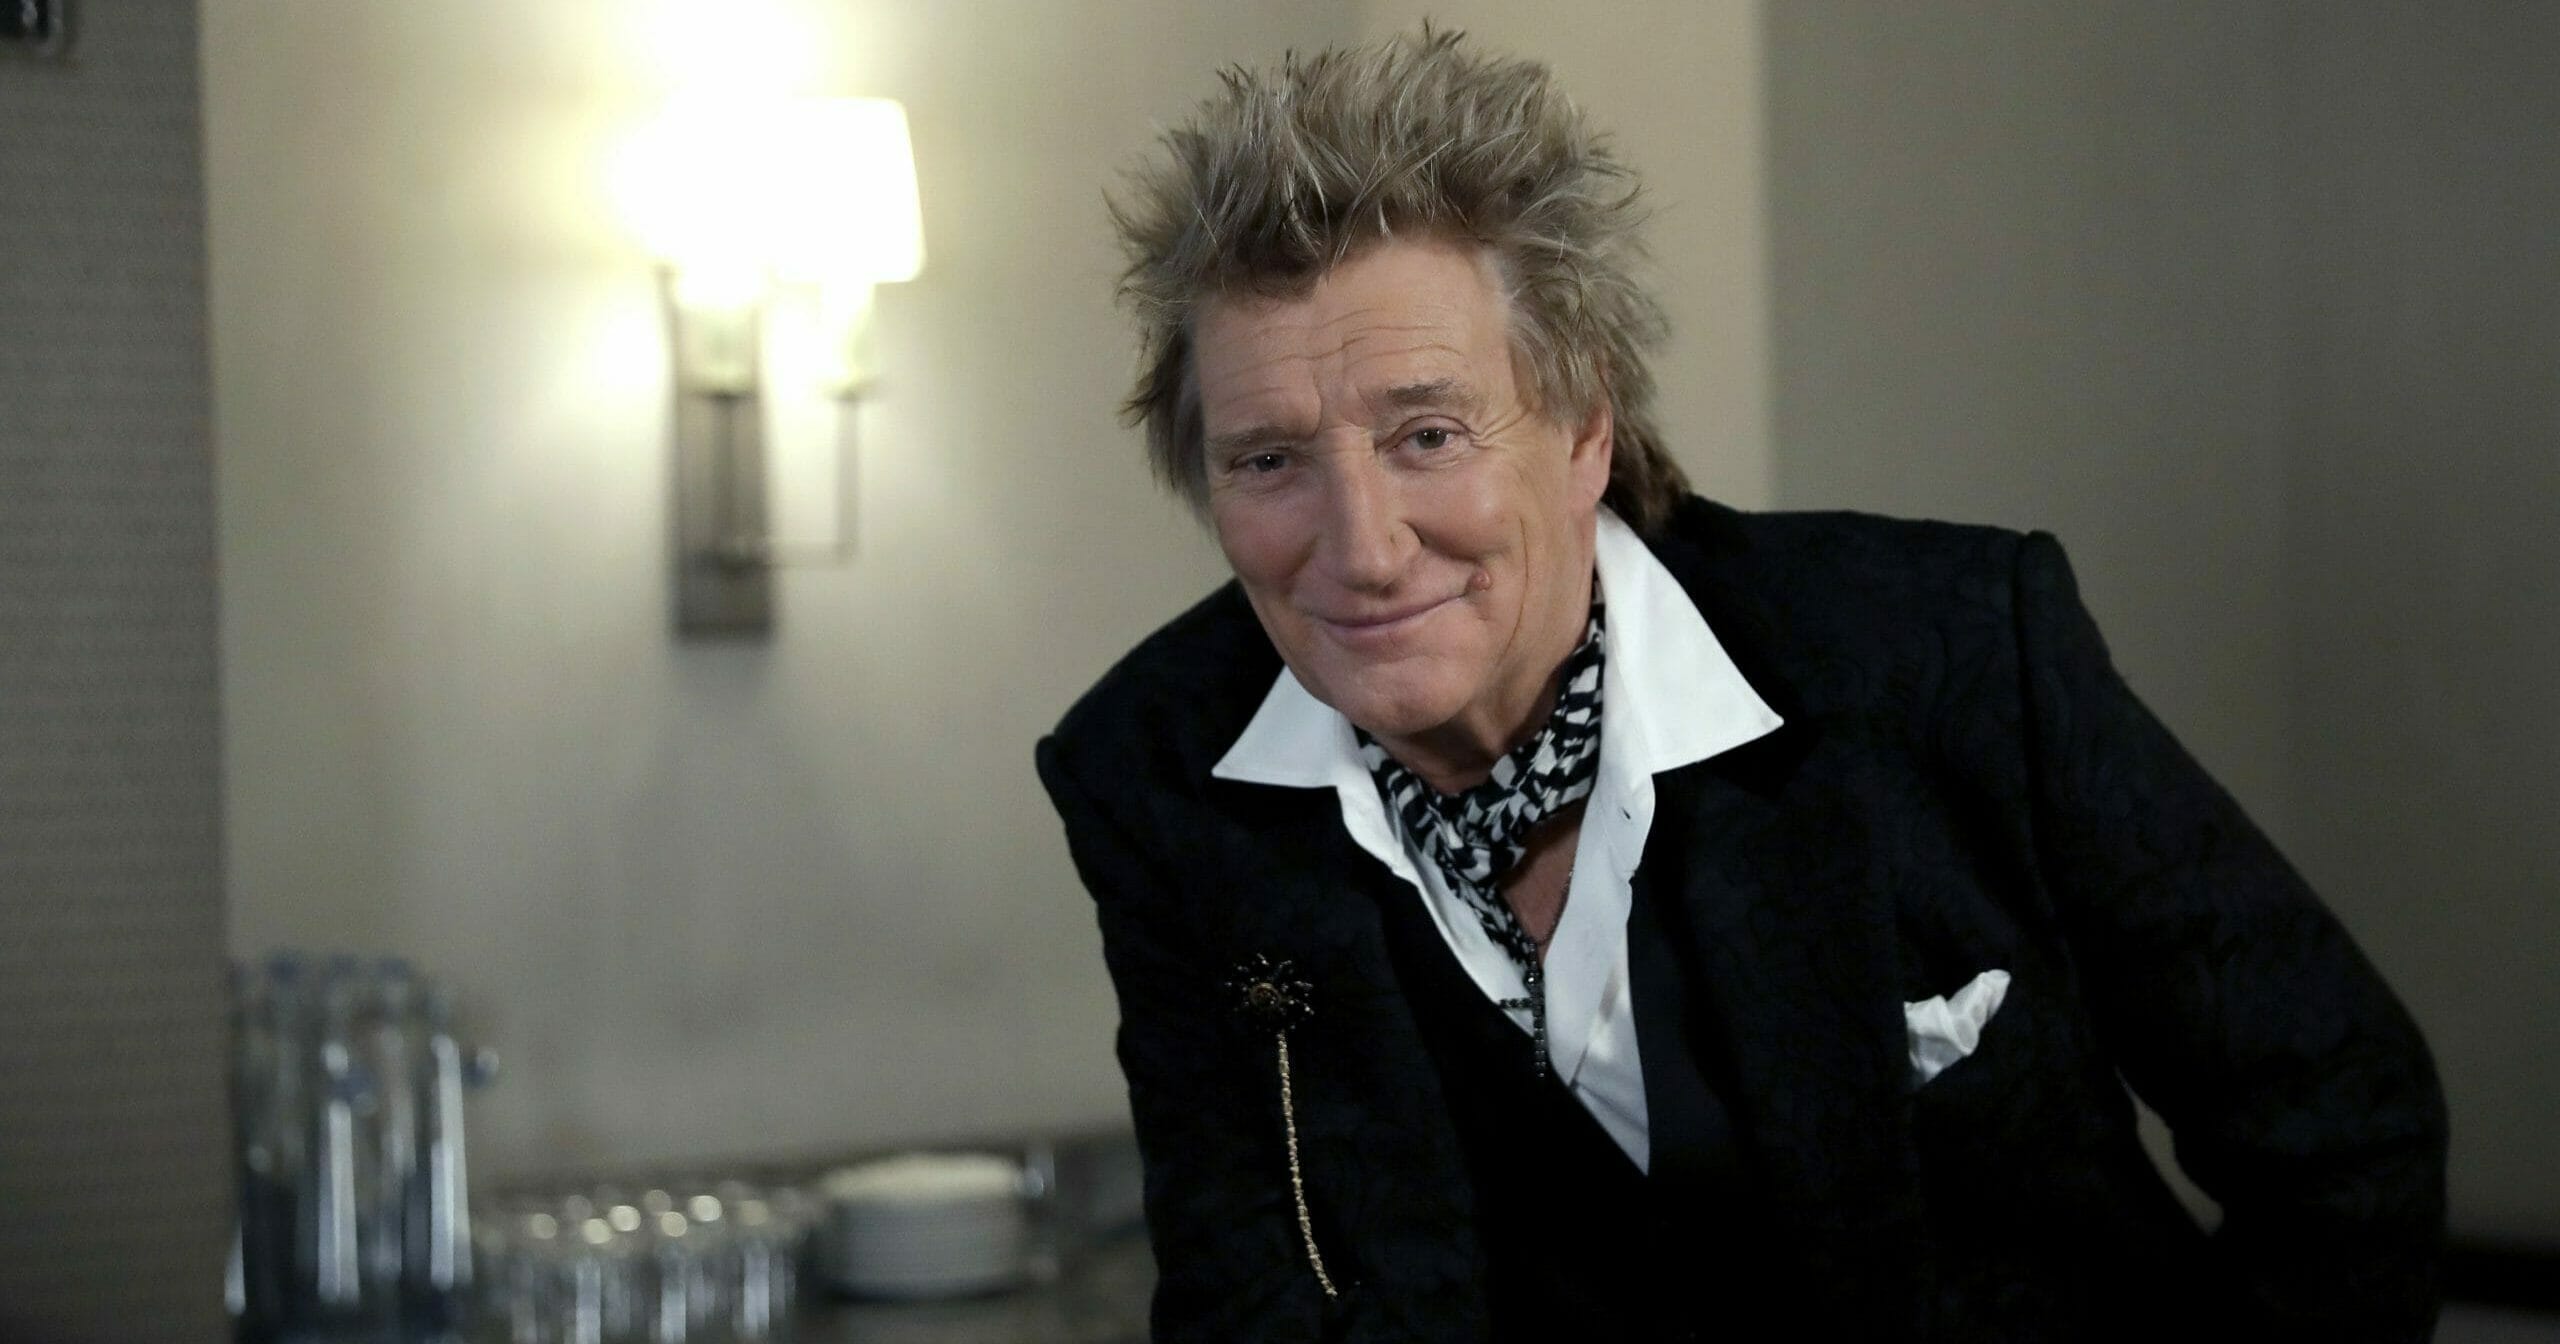 In this photo taken on Nov. 14, 2019, British singer Rod Stewart poses for the media after an interview with The Associated Press at a hotel in London. Stewart, known for decades as a consummate crooner, rocker, fashion plate and tongue-in-cheek sex symbol, is adding a new element to his image: serious model railroad builder. The one-time front man of The Faces who has hits dating back to the 1960s, has put the finishing touch on a 23-year project that has landed him on the cover of Railway Modeller magazine, a far cry from Rolling Stone, whose cover he has graced many times.